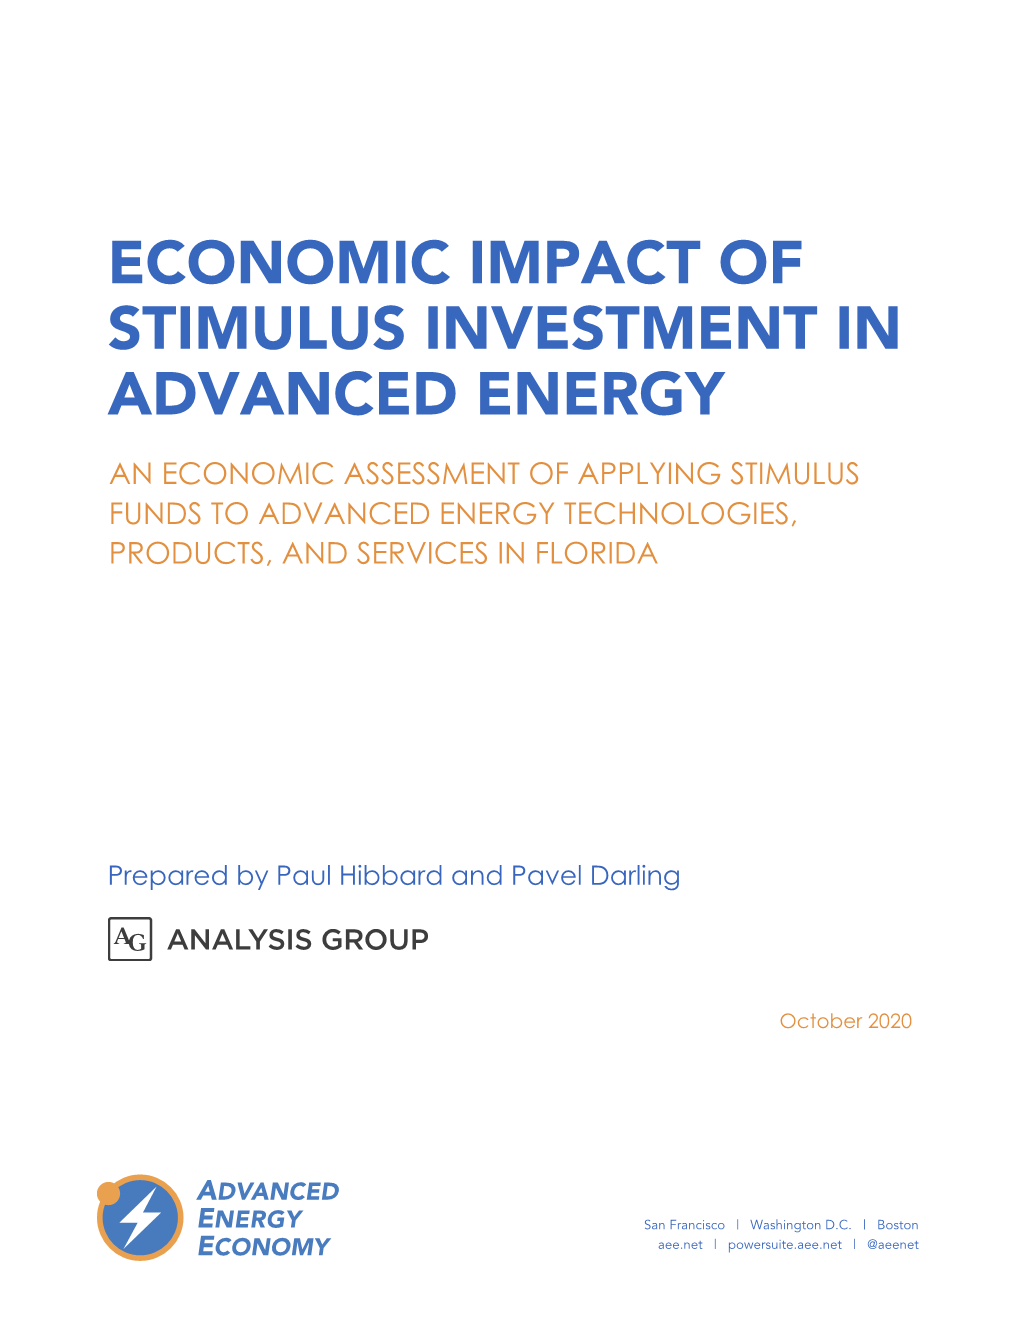 Economic Impact of Stimulus Investment in Advanced Energy an Economic Assessment of Applying Stimulus Funds to Advanced Energy Technologies